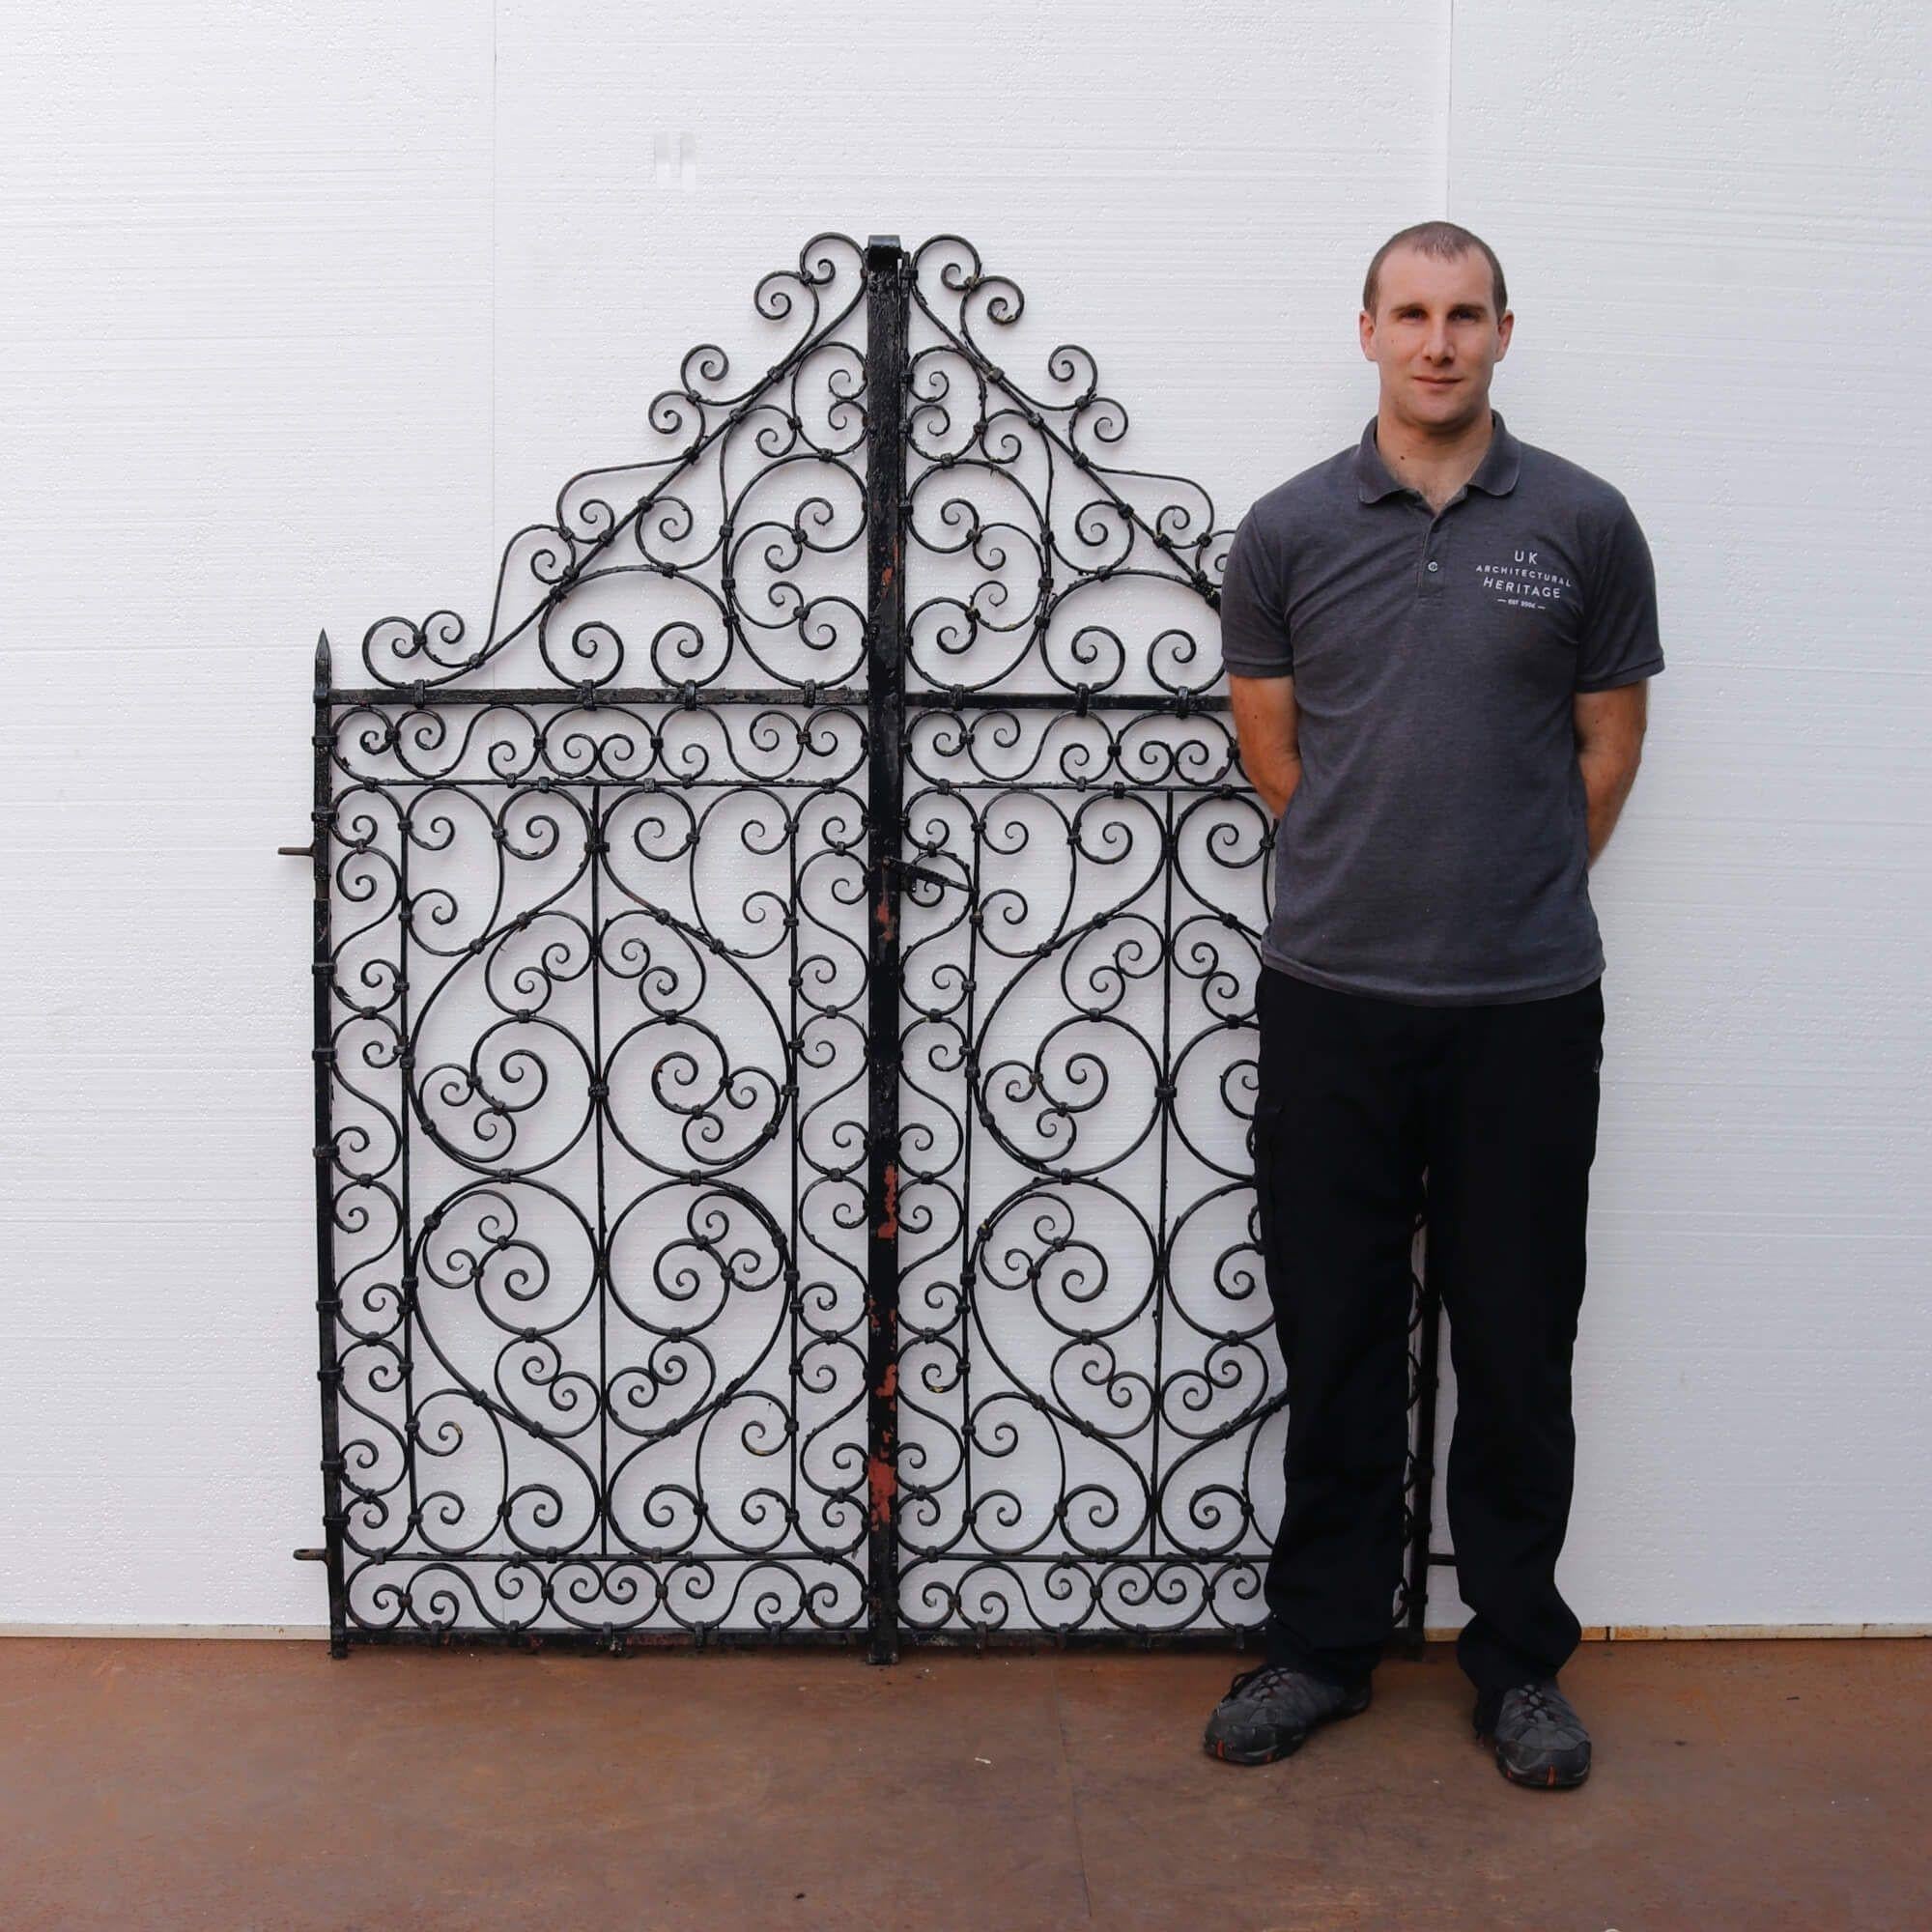 Set of Victorian wrought iron scroll pedestrian gates. The swirling, repeating scroll design and swooping top accompanied by its wide stature would instantly give an eye-catching look to a property. These gates date to 1890, showcasing rich English